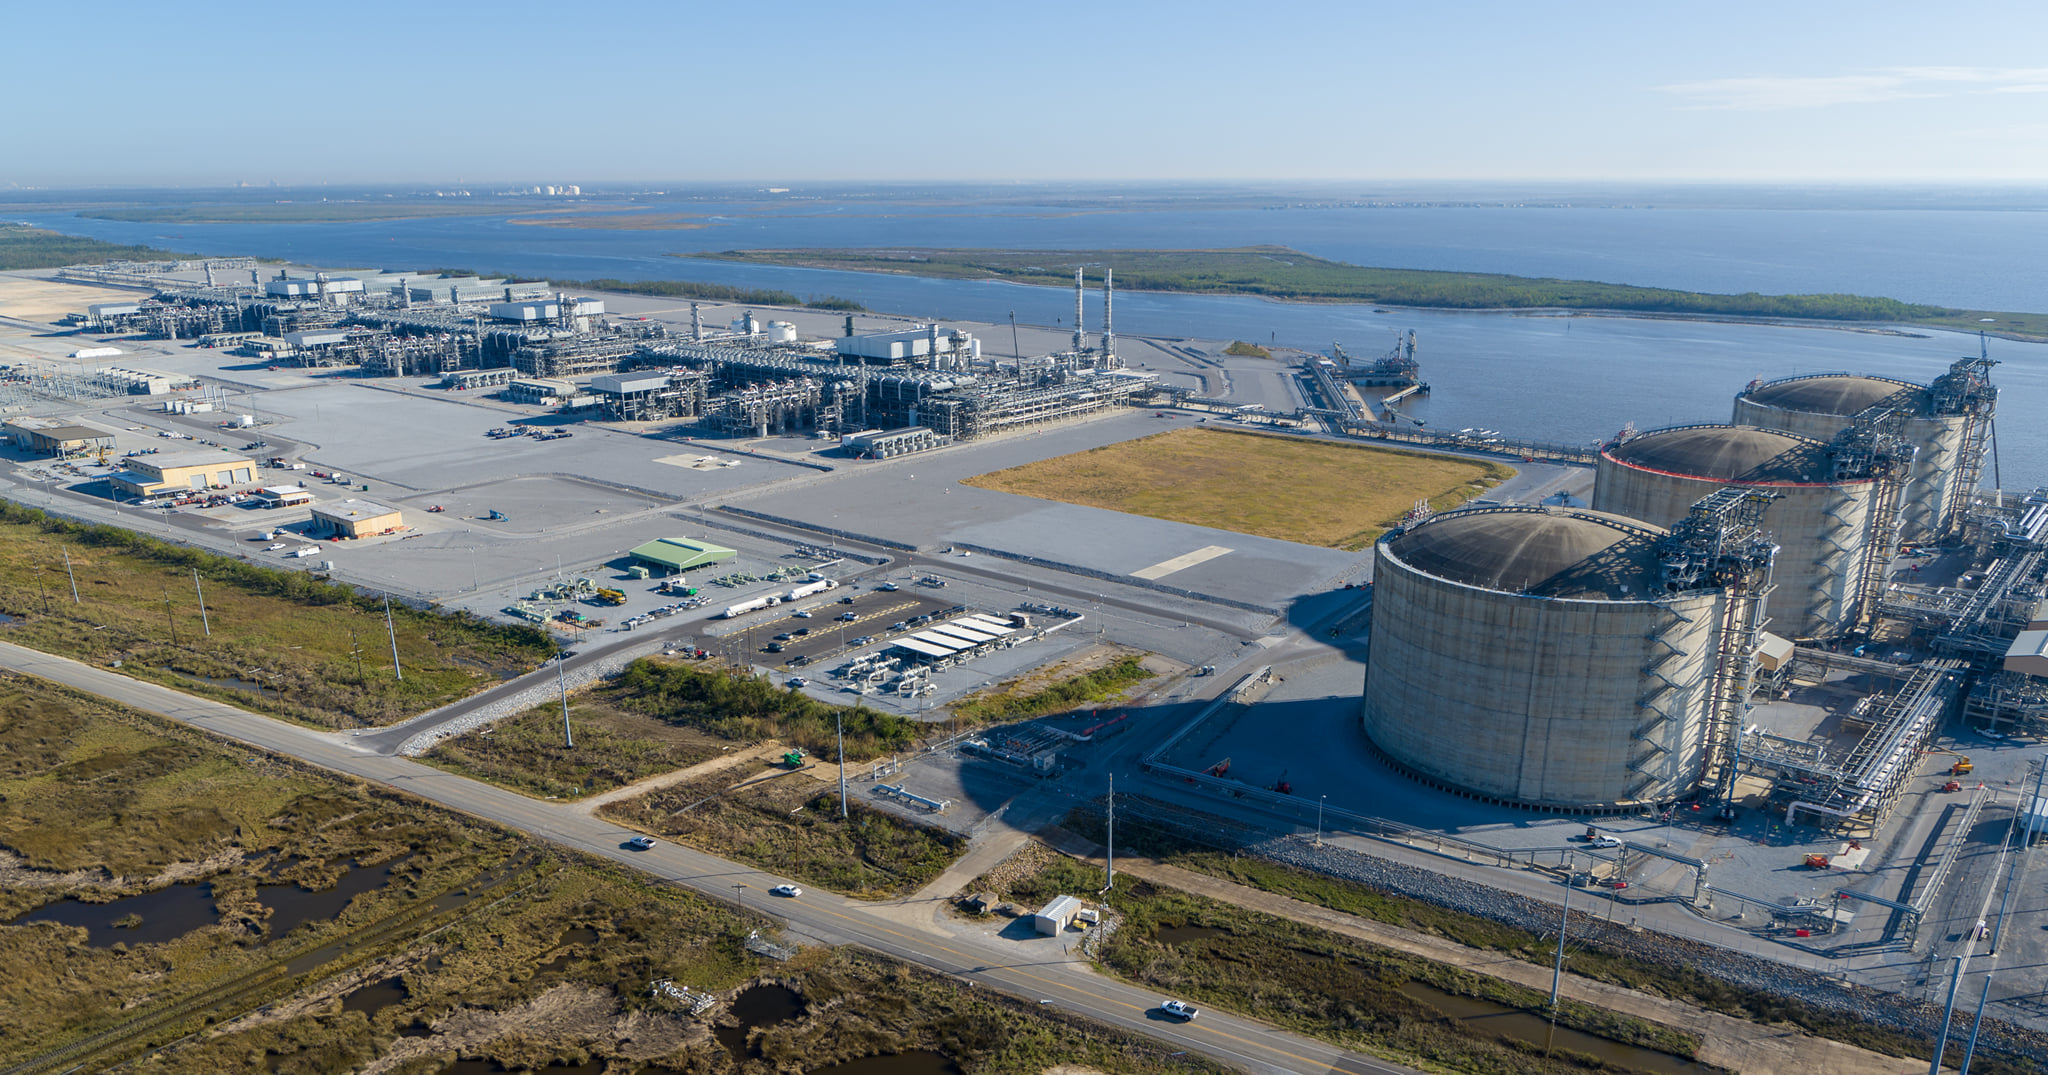 Cameron LNG projects is one of five that saw its export term extended through 2050 in round four.